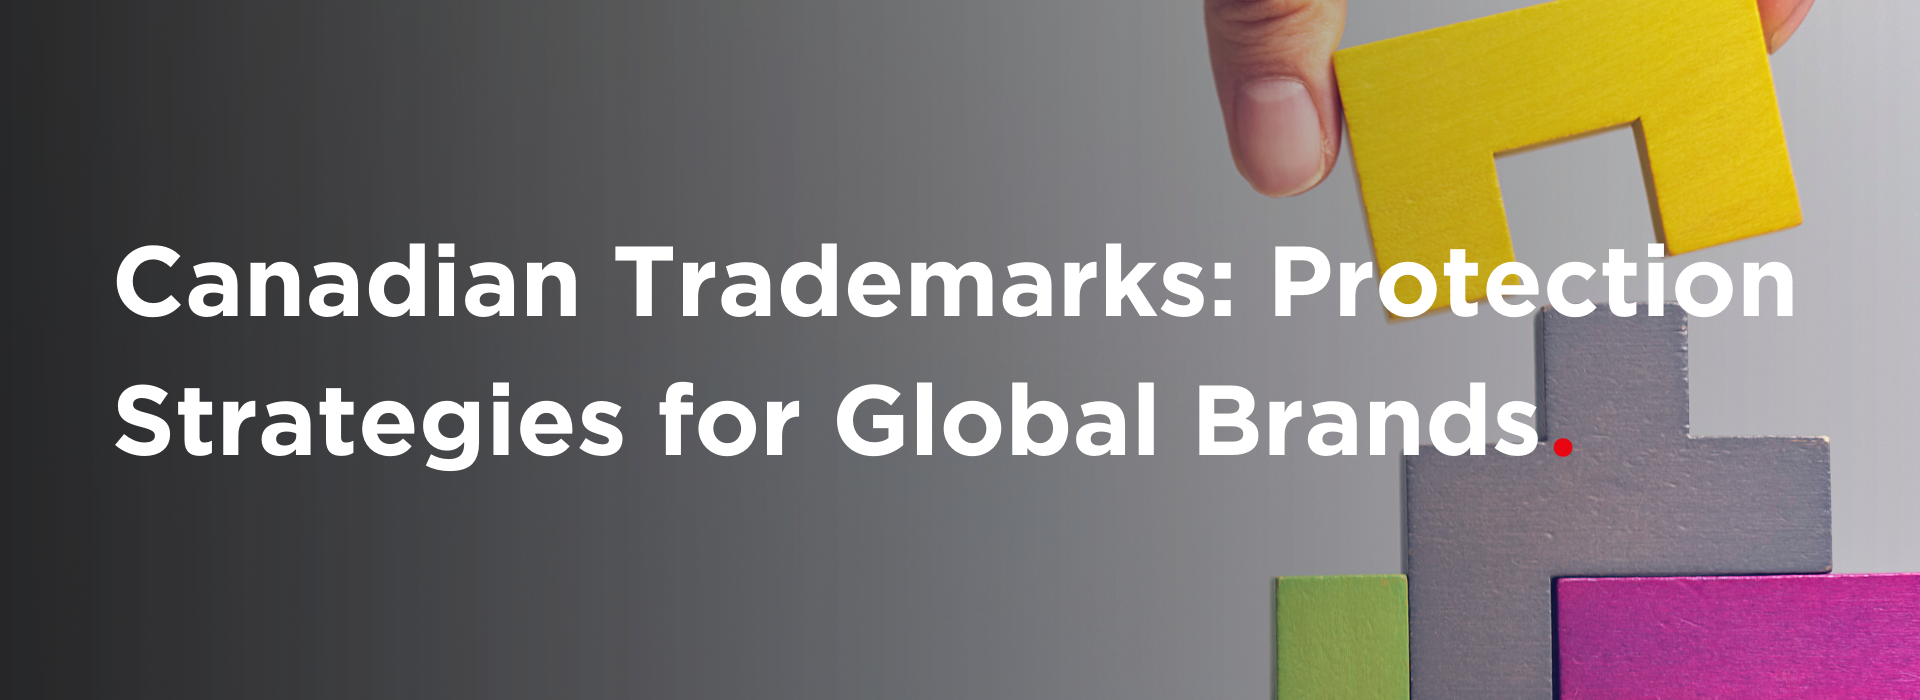 Canadian Trademarks: Protection Strategies for Global Brands